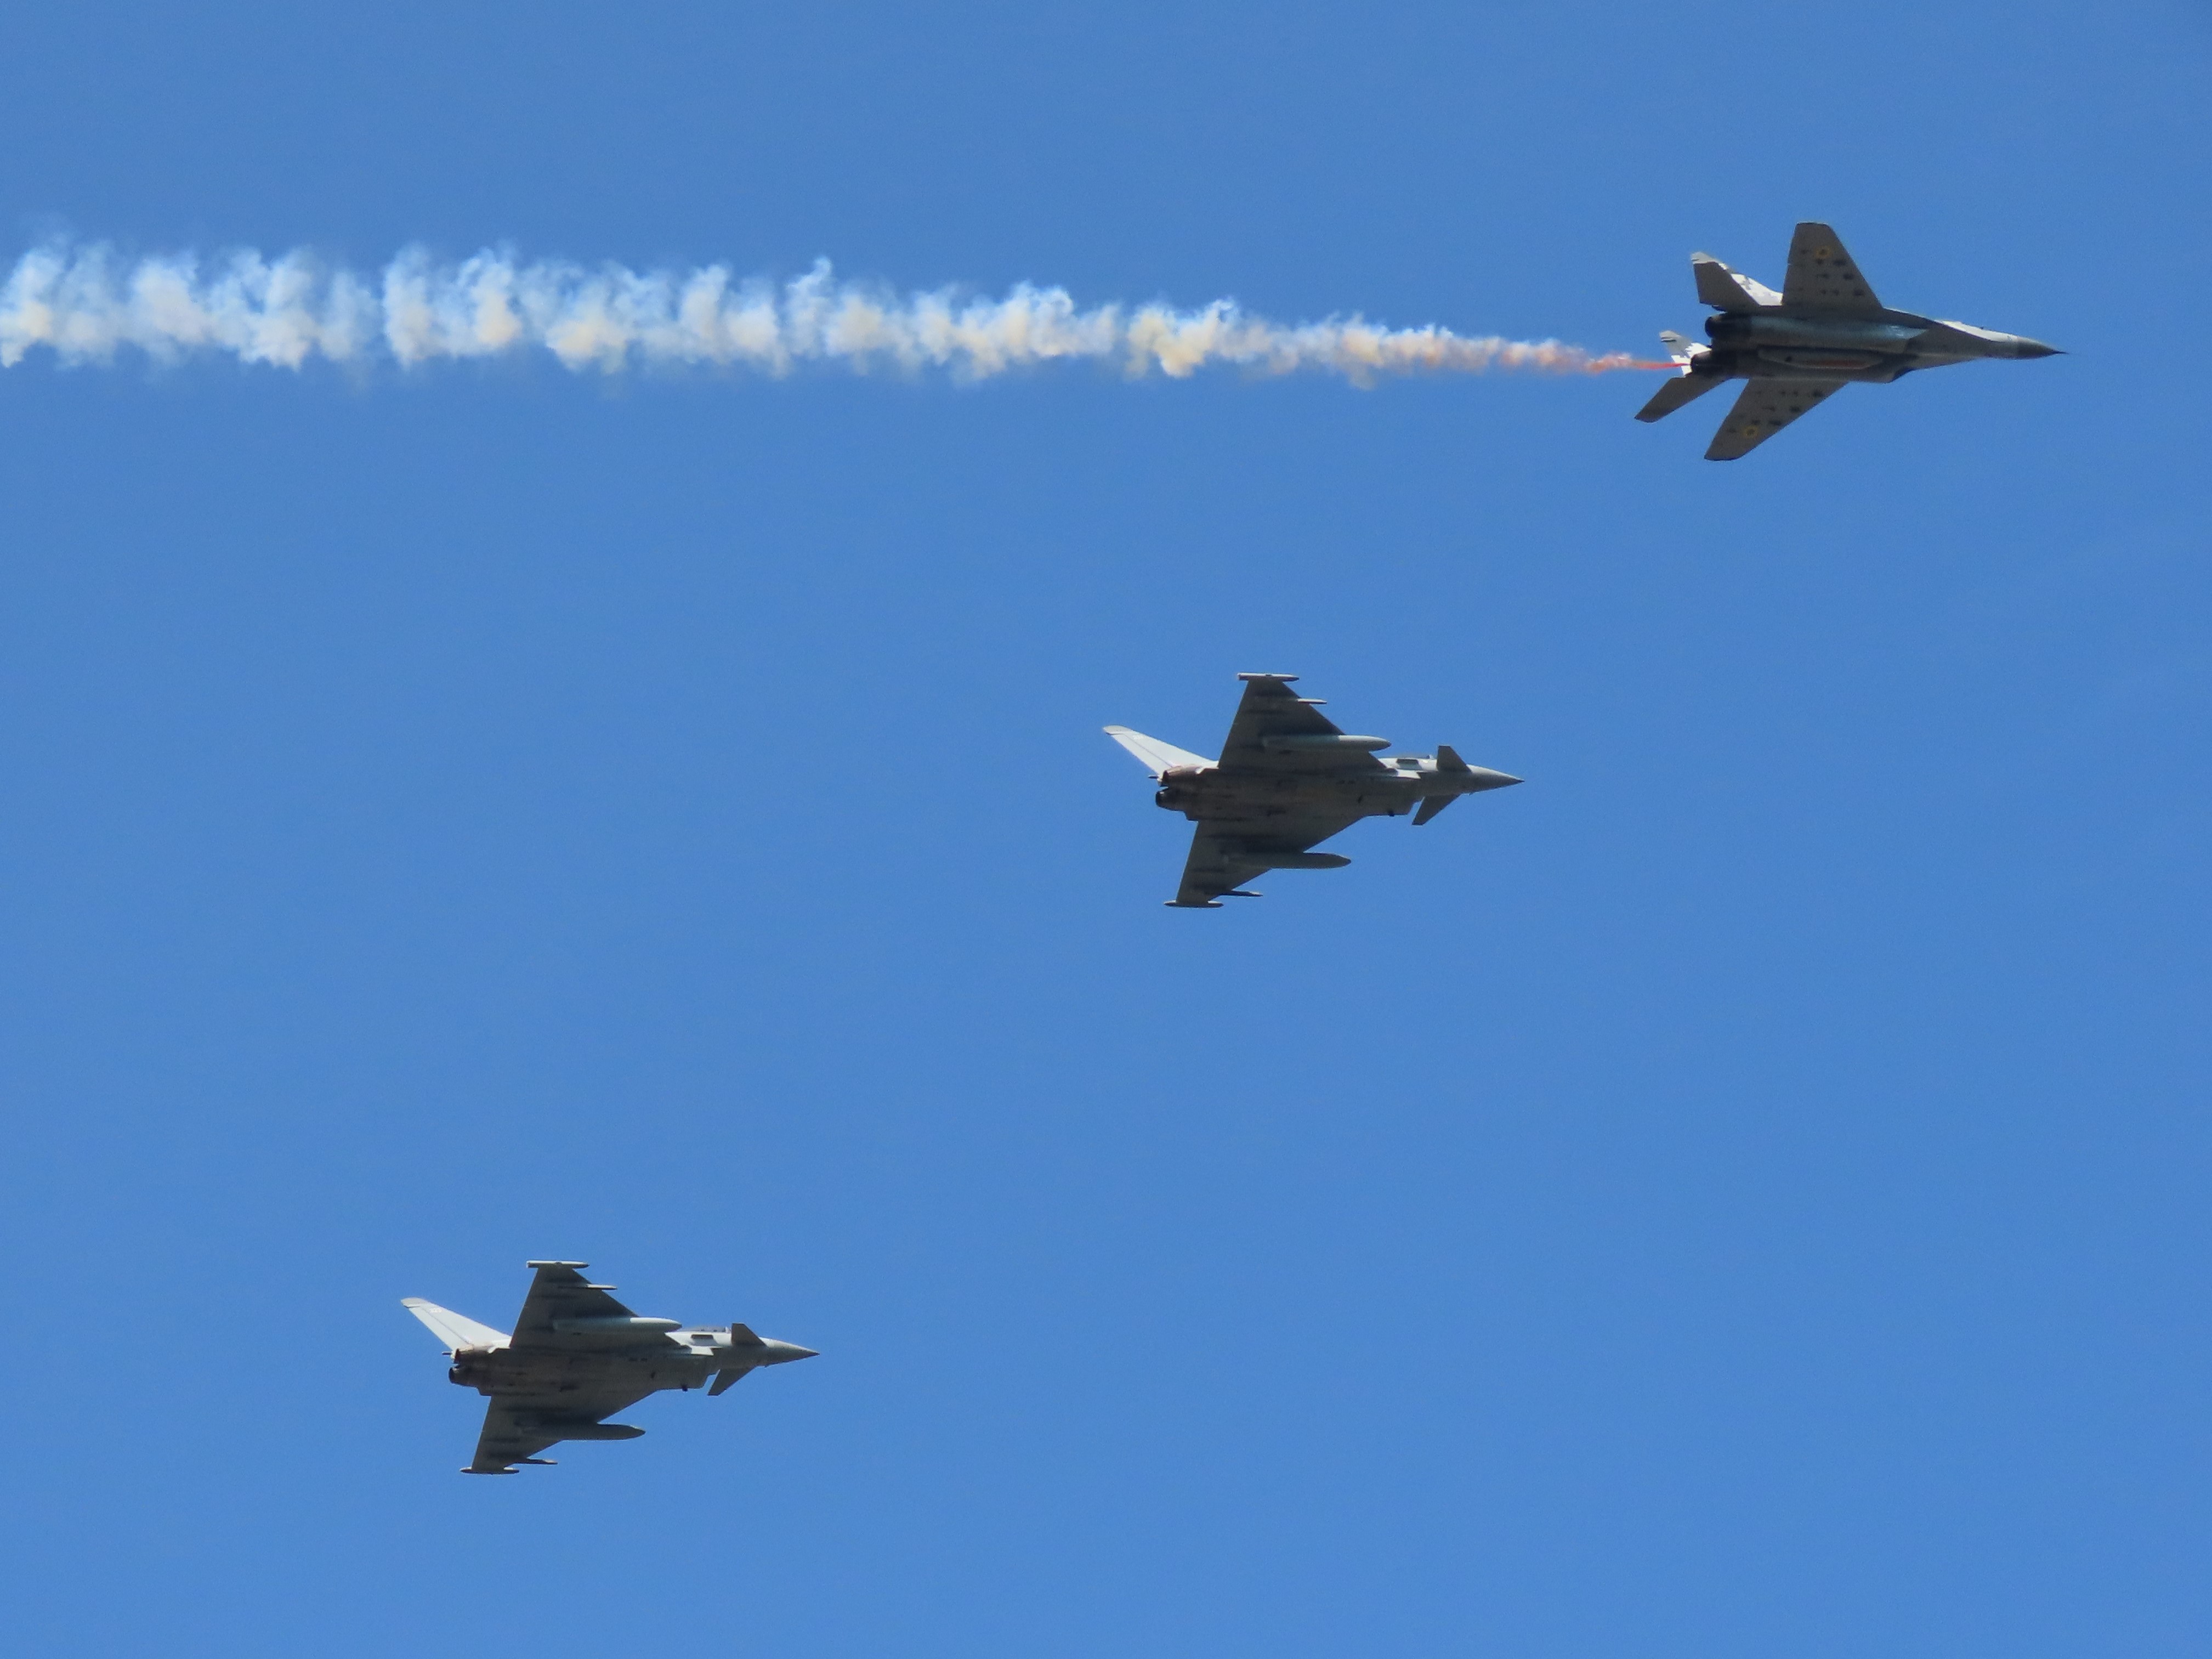 Typhoons fly in formation trailing yellow and blue smoke.